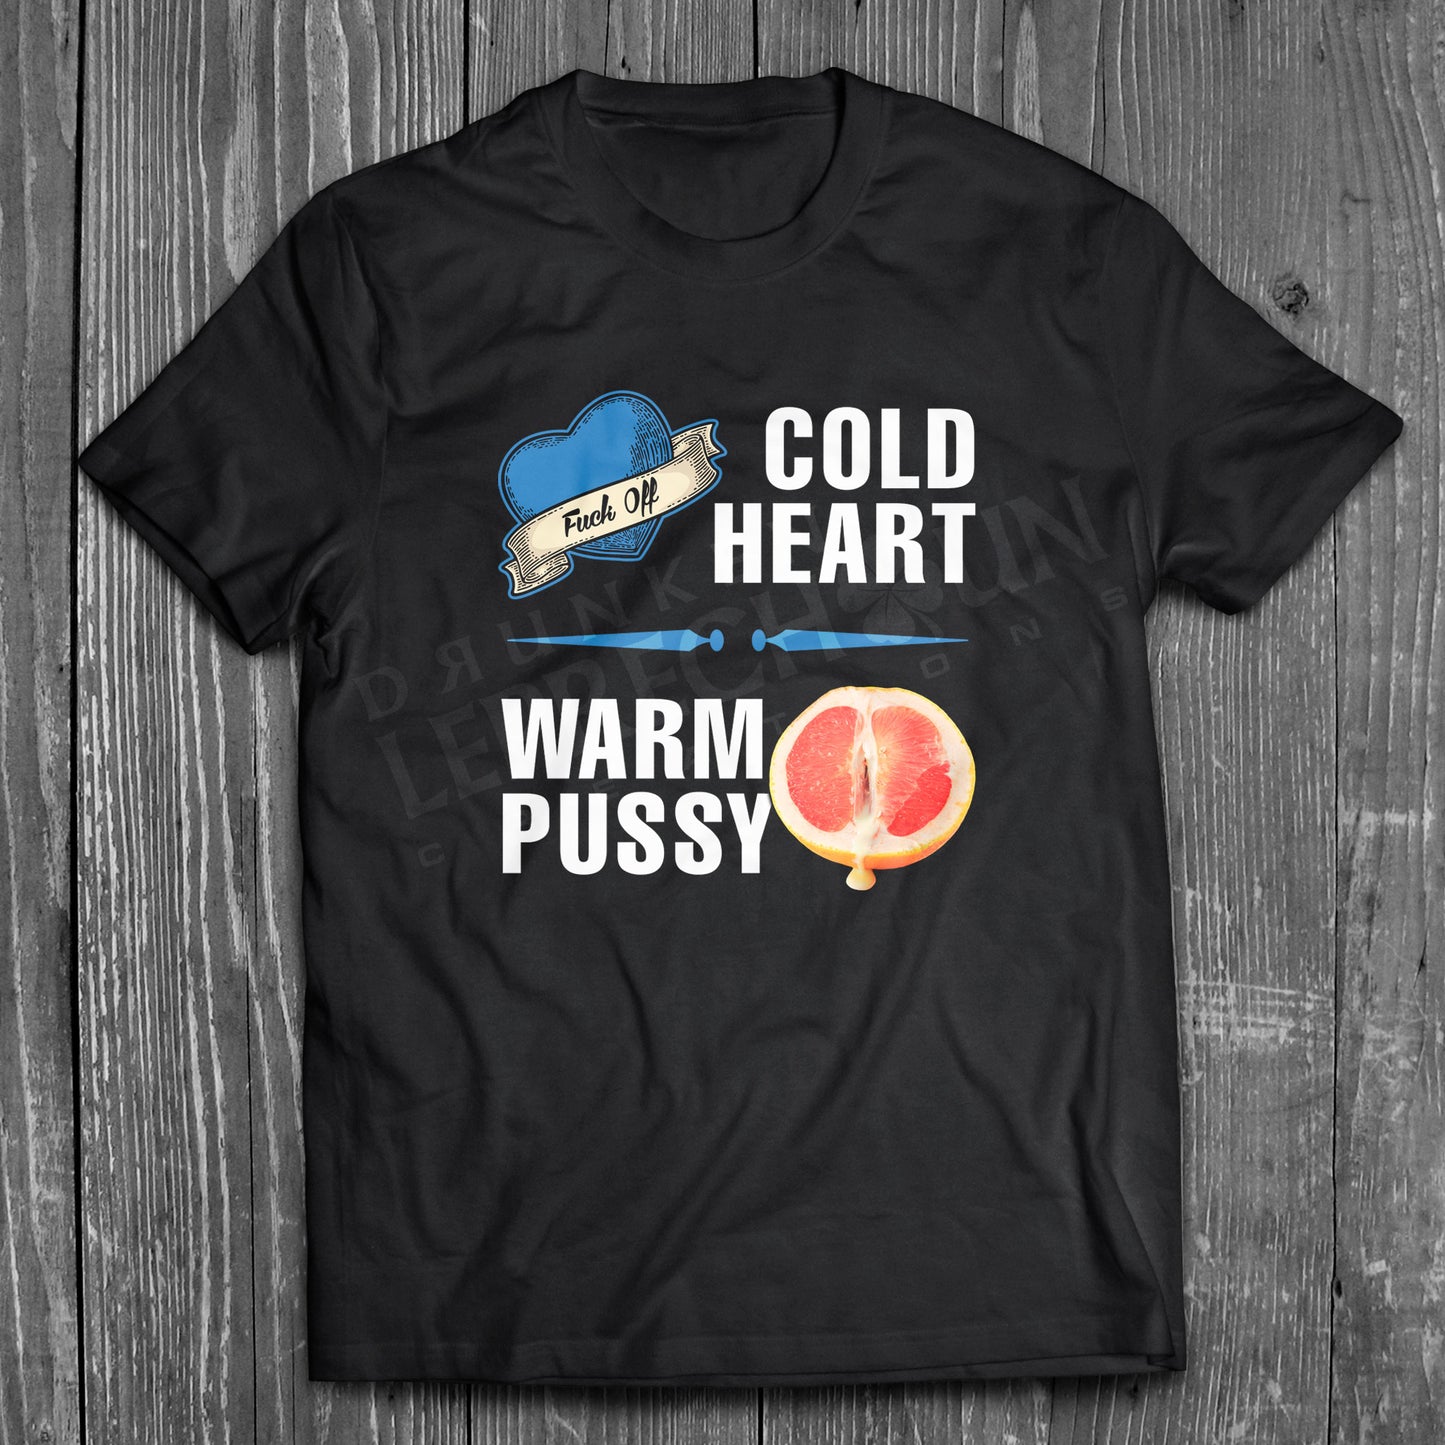 Cold Heart - Warm Pussy